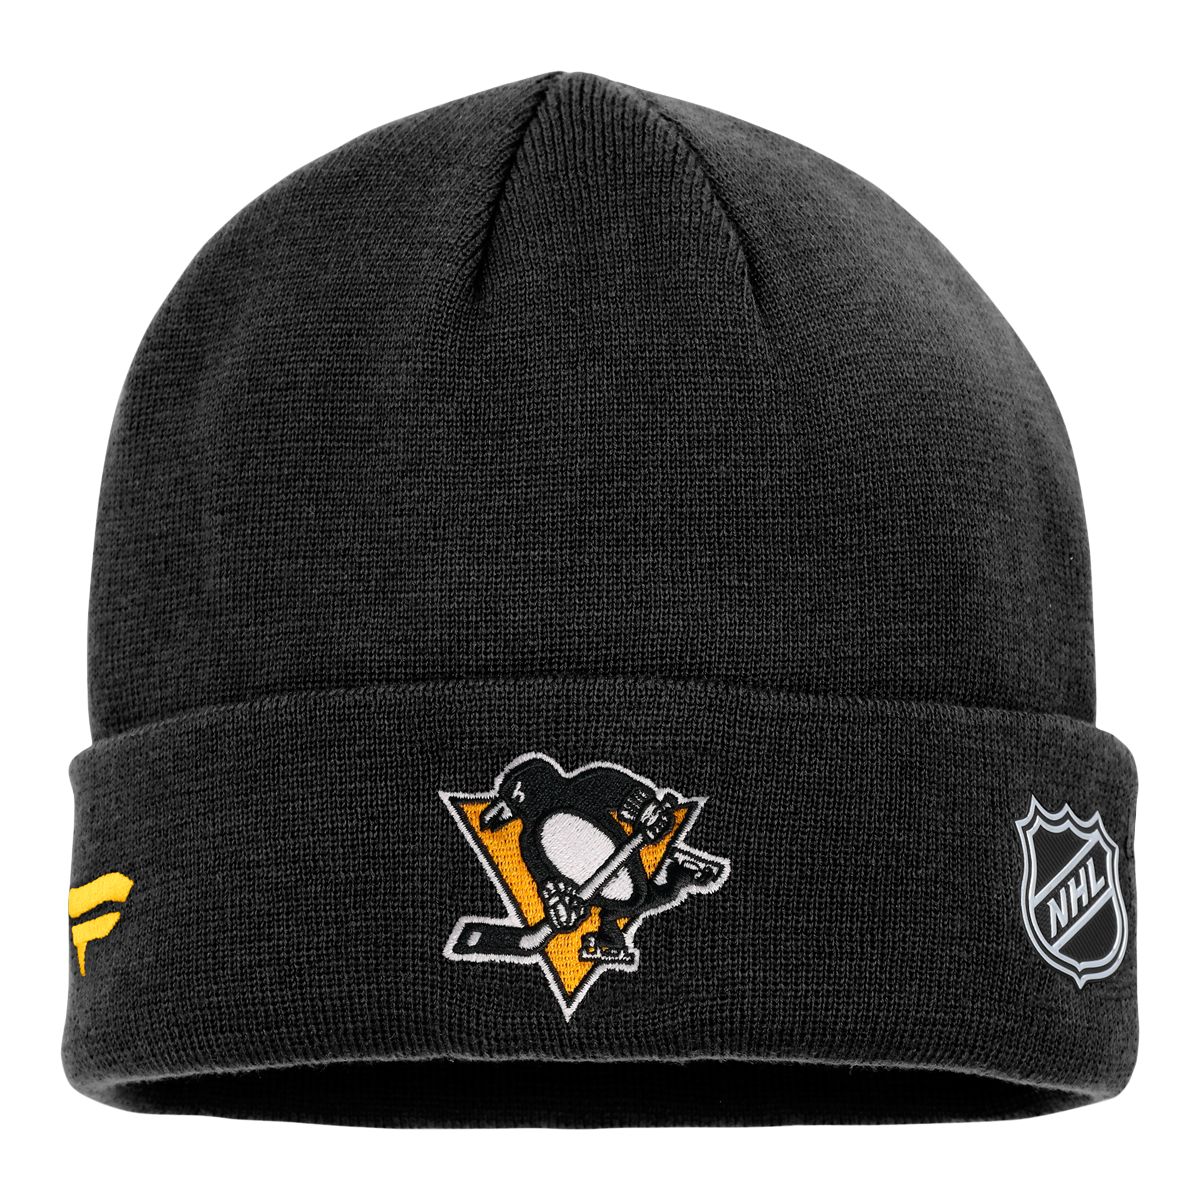 Pittsburgh Penguins Fanatics Authentic Pro Rink Cuffed Knit Hat